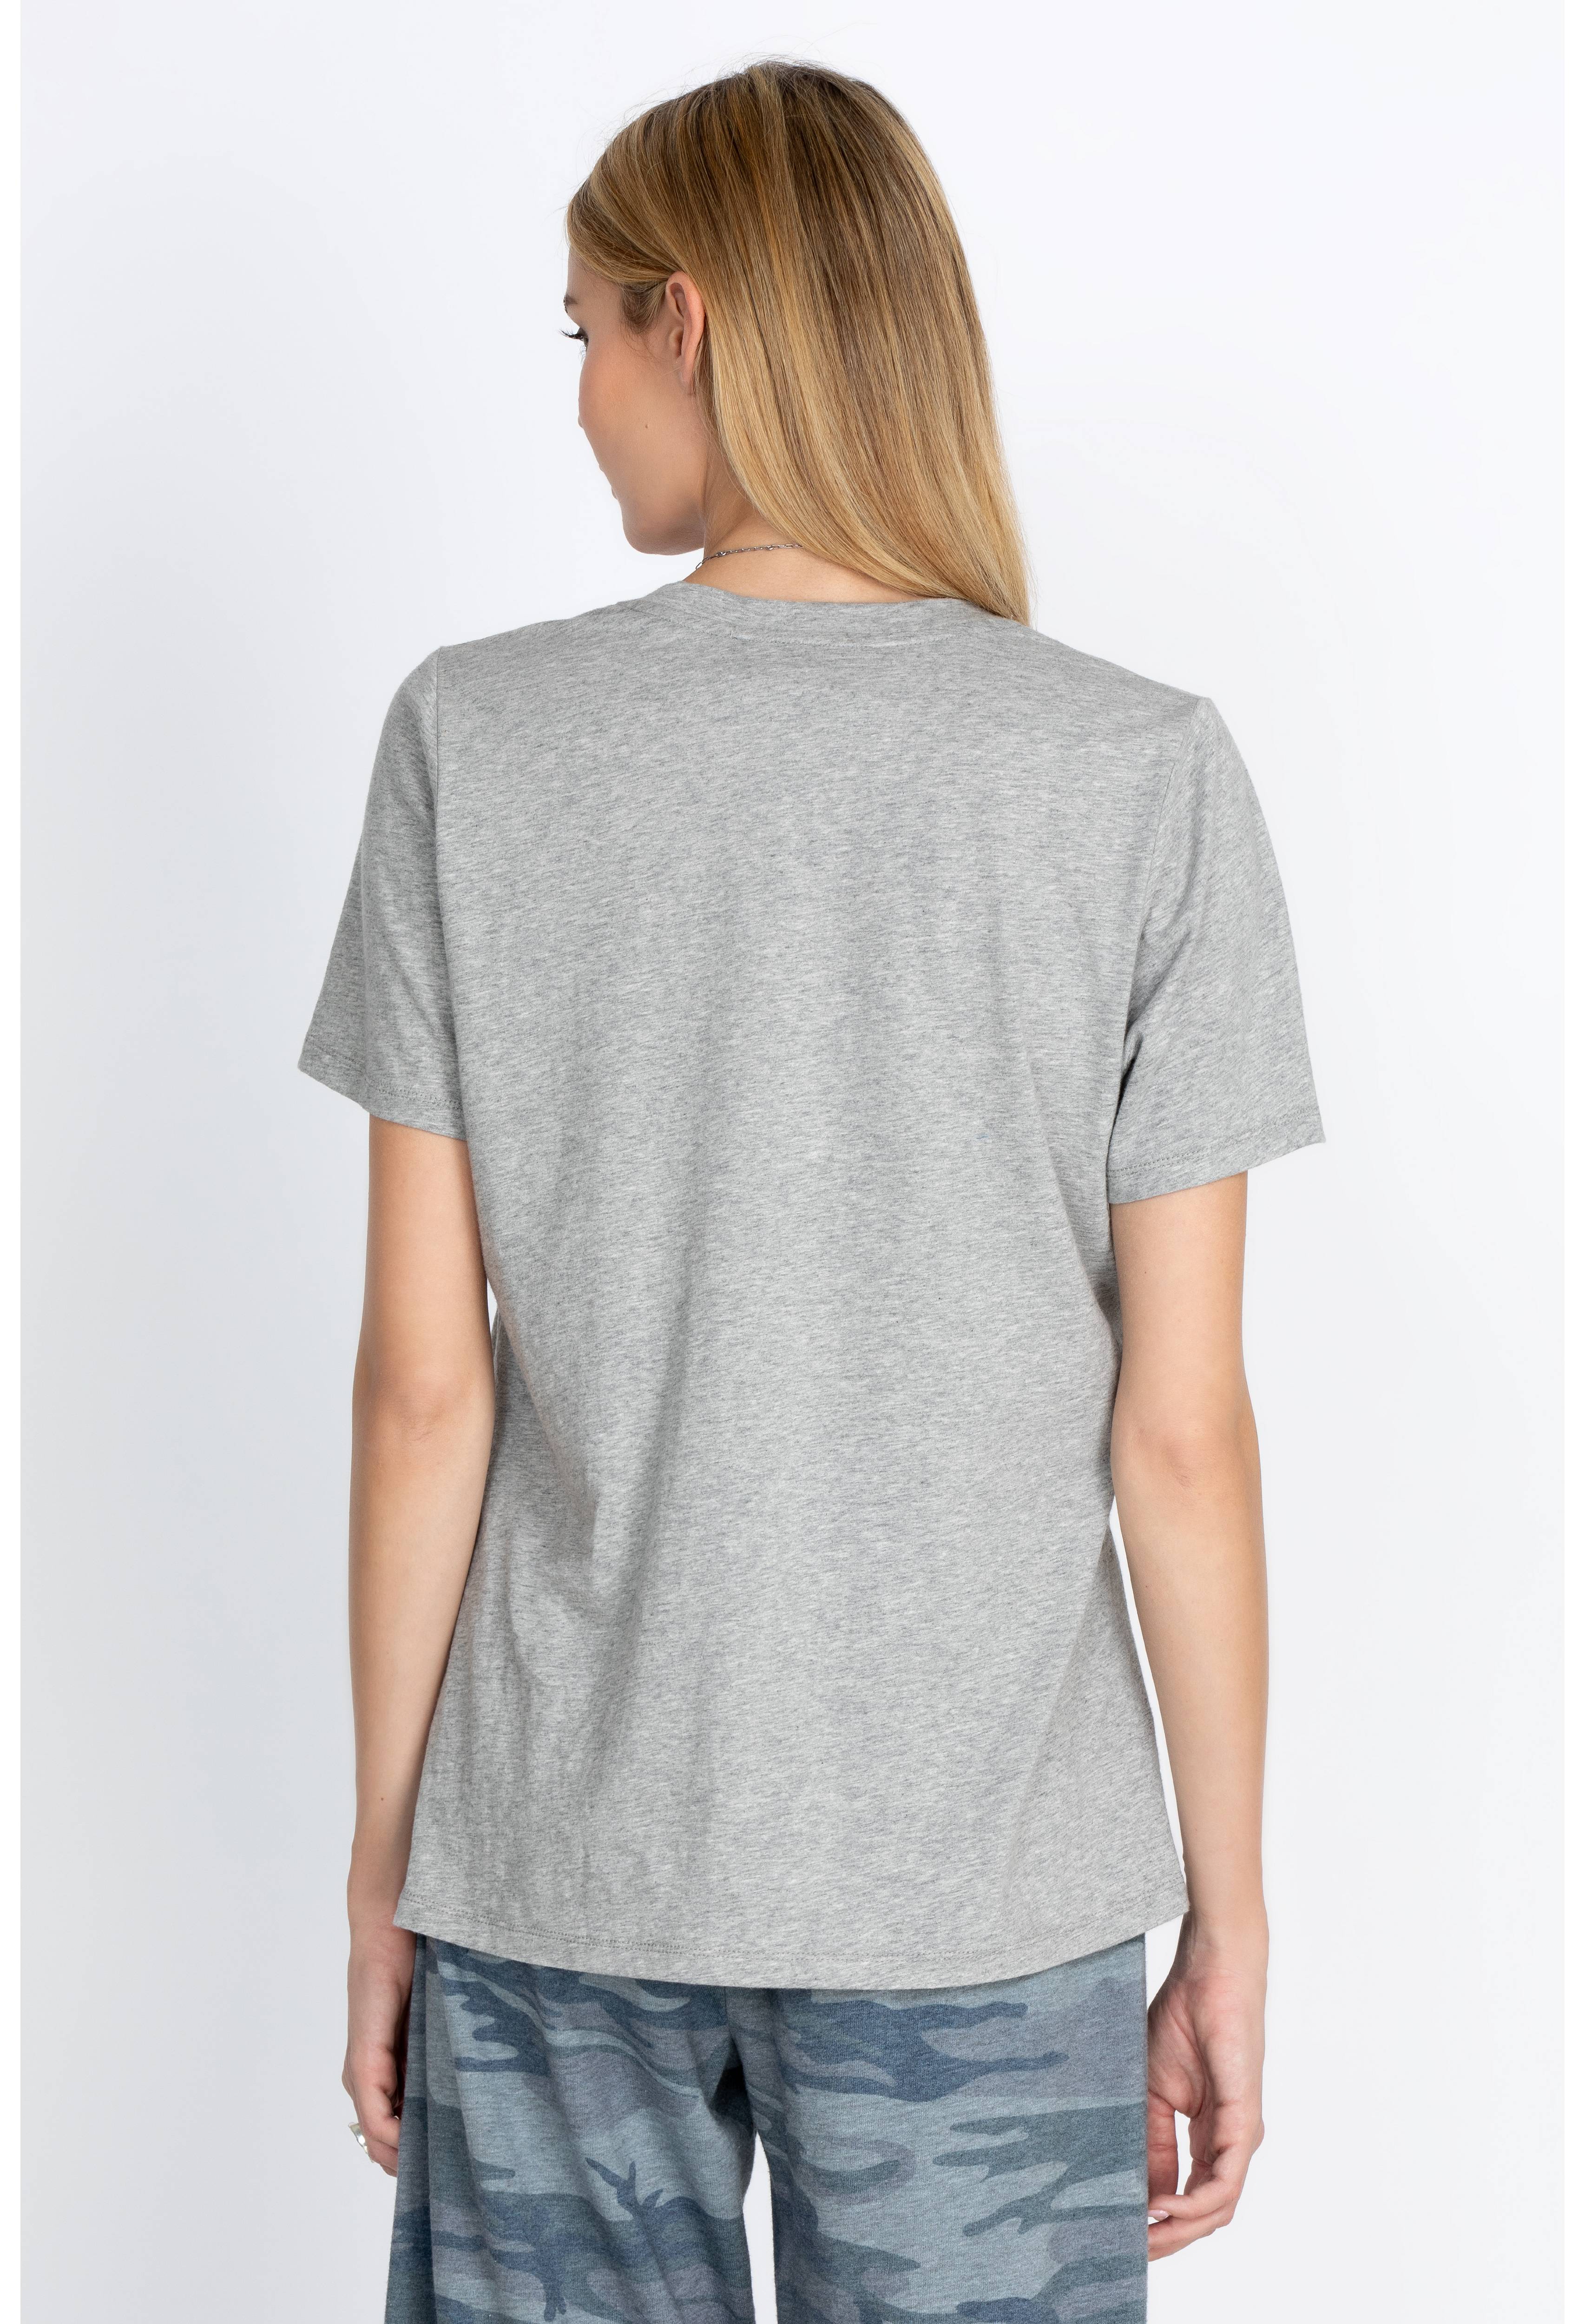 S/S V-Neck Layering Tee, , large image number 3